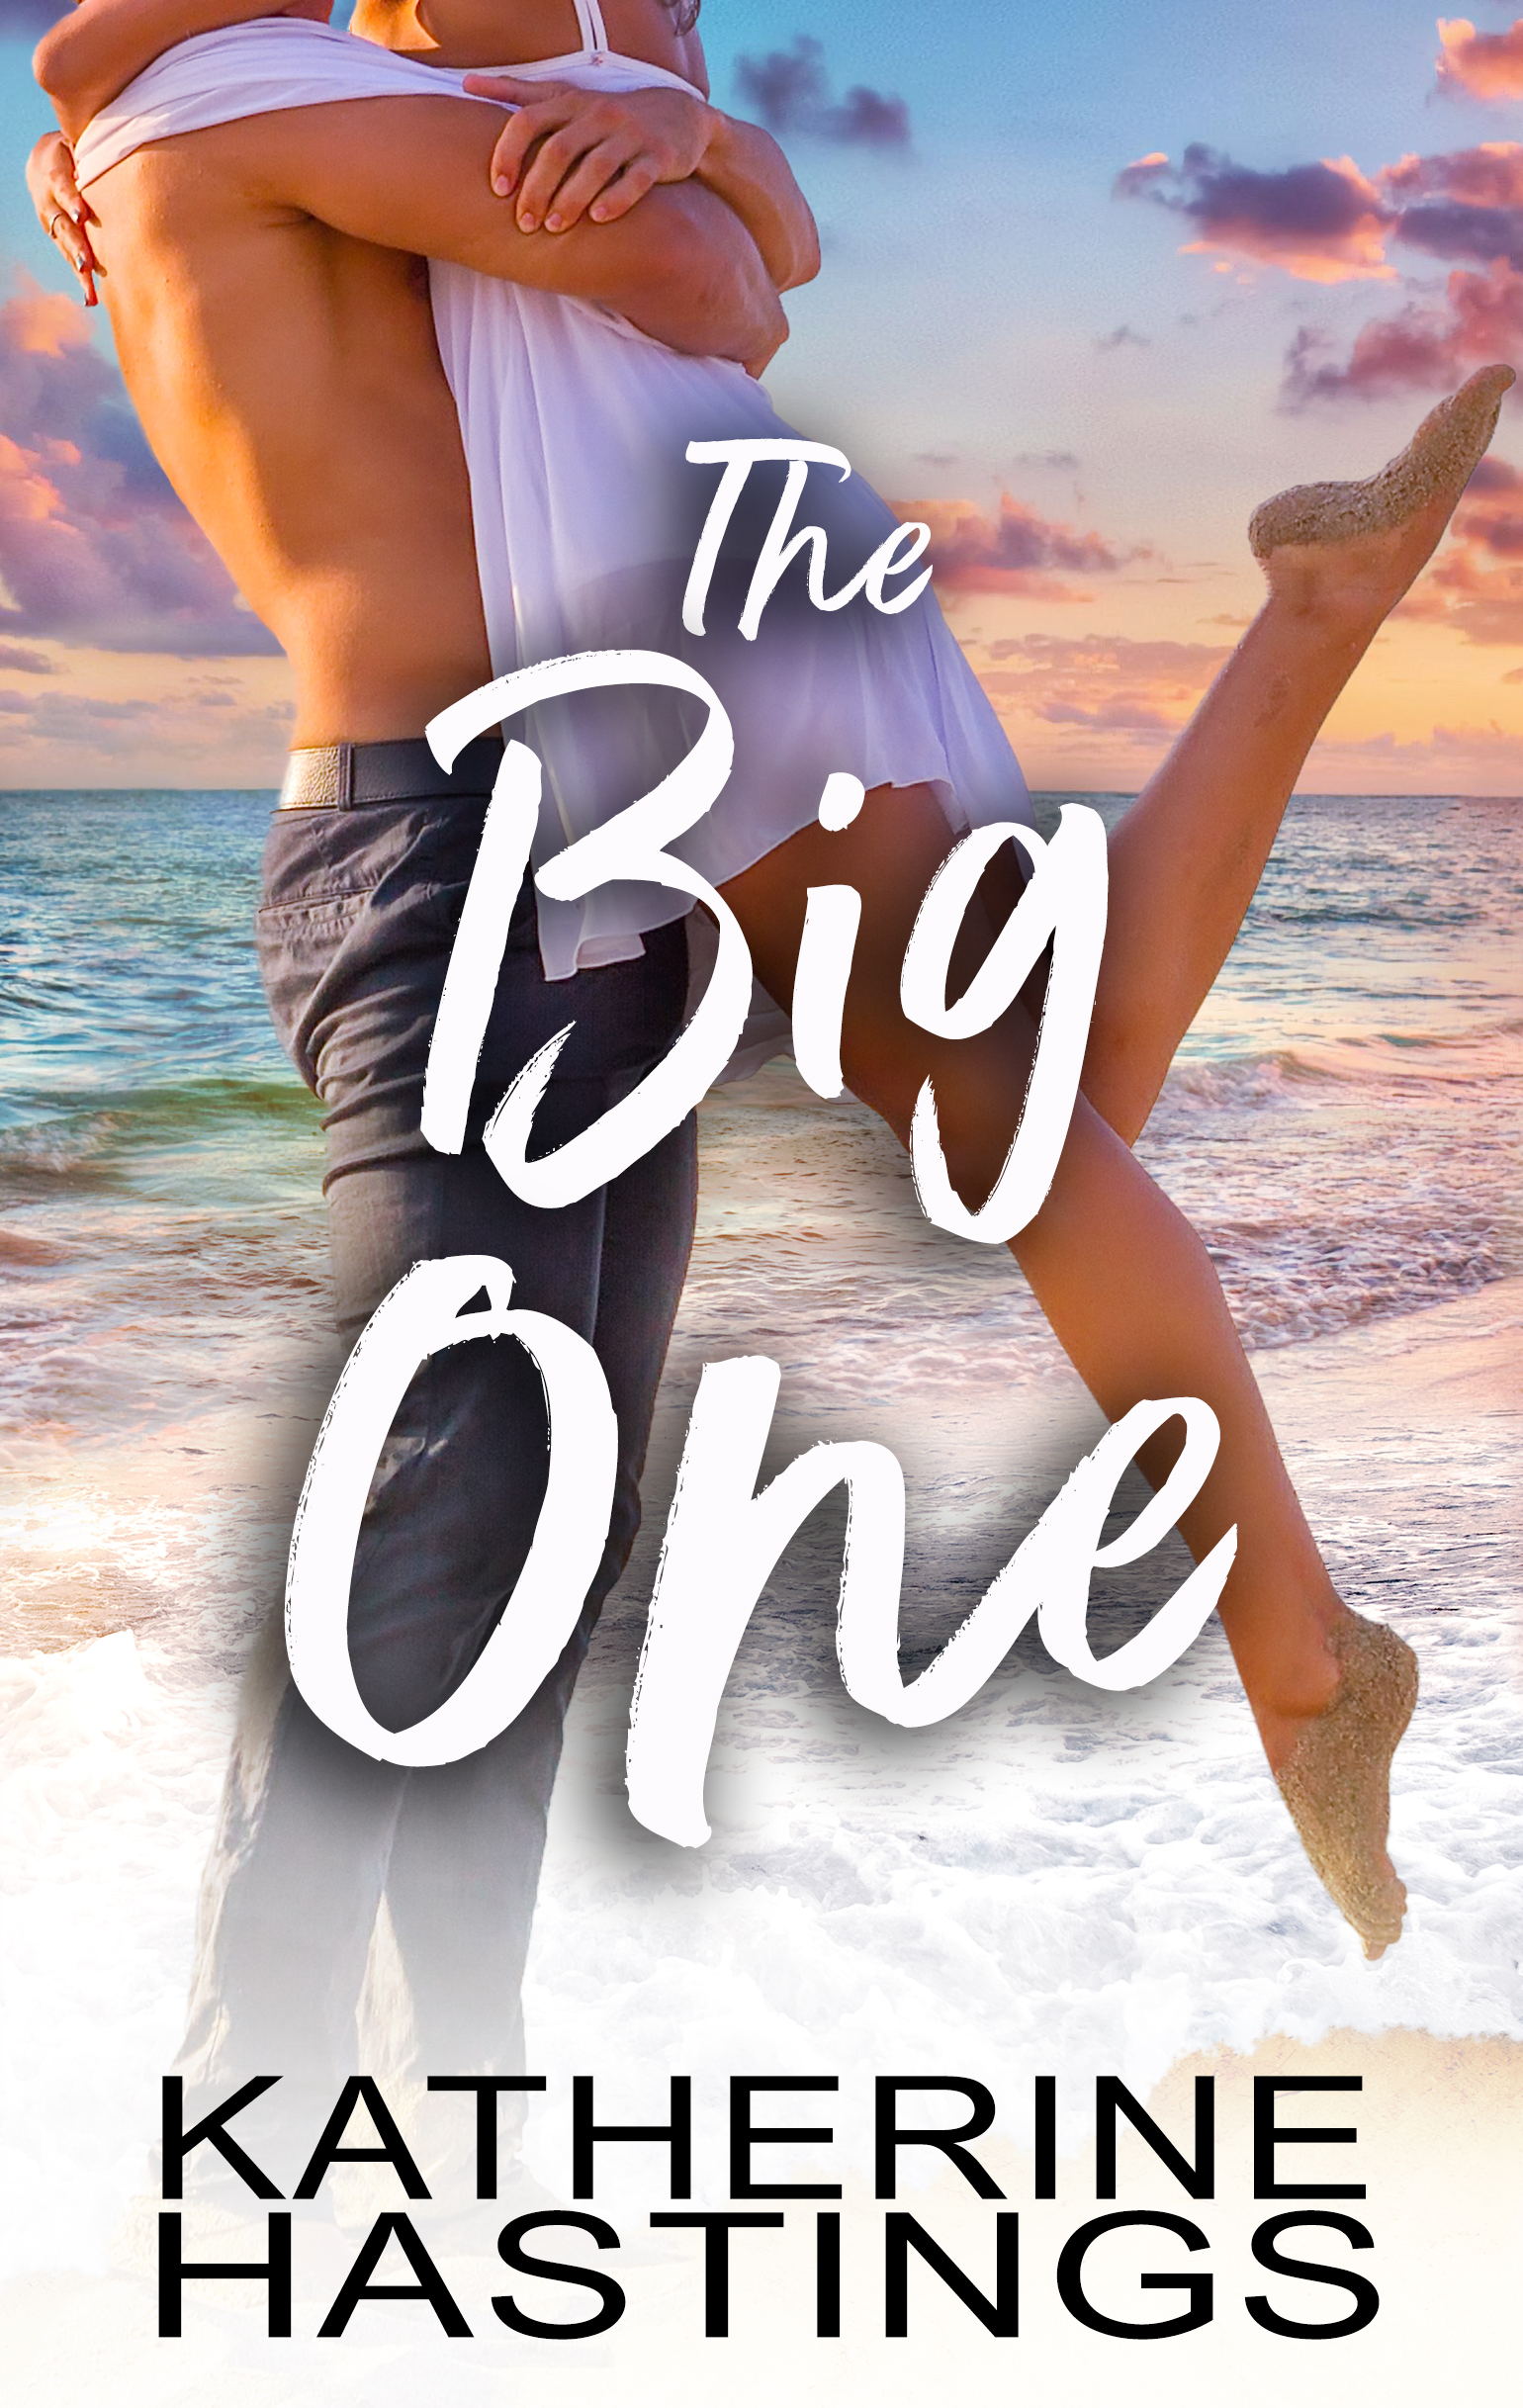 FREE: The Big One by Katherine Hastings